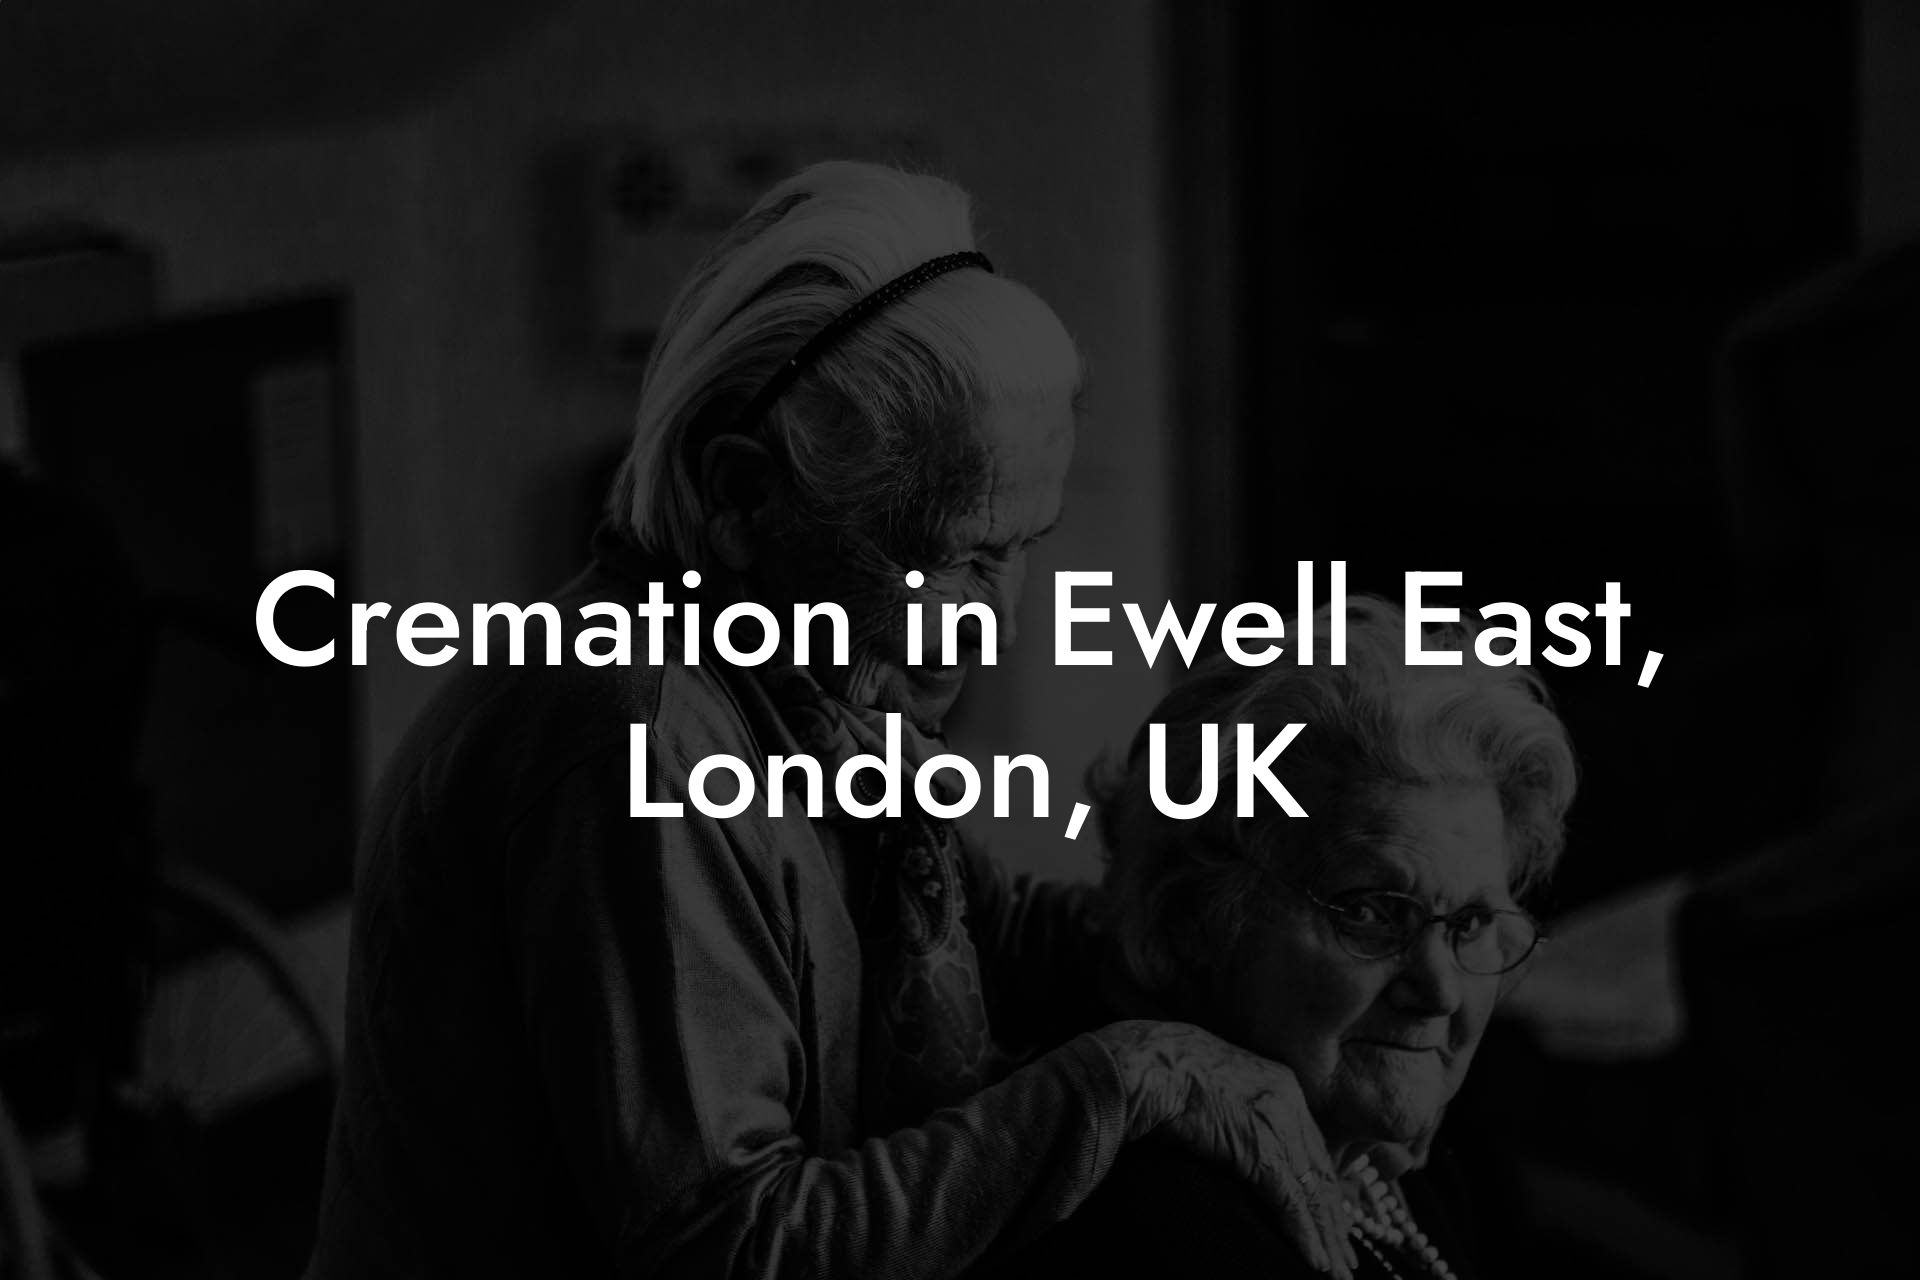 Cremation in Ewell East, London, UK